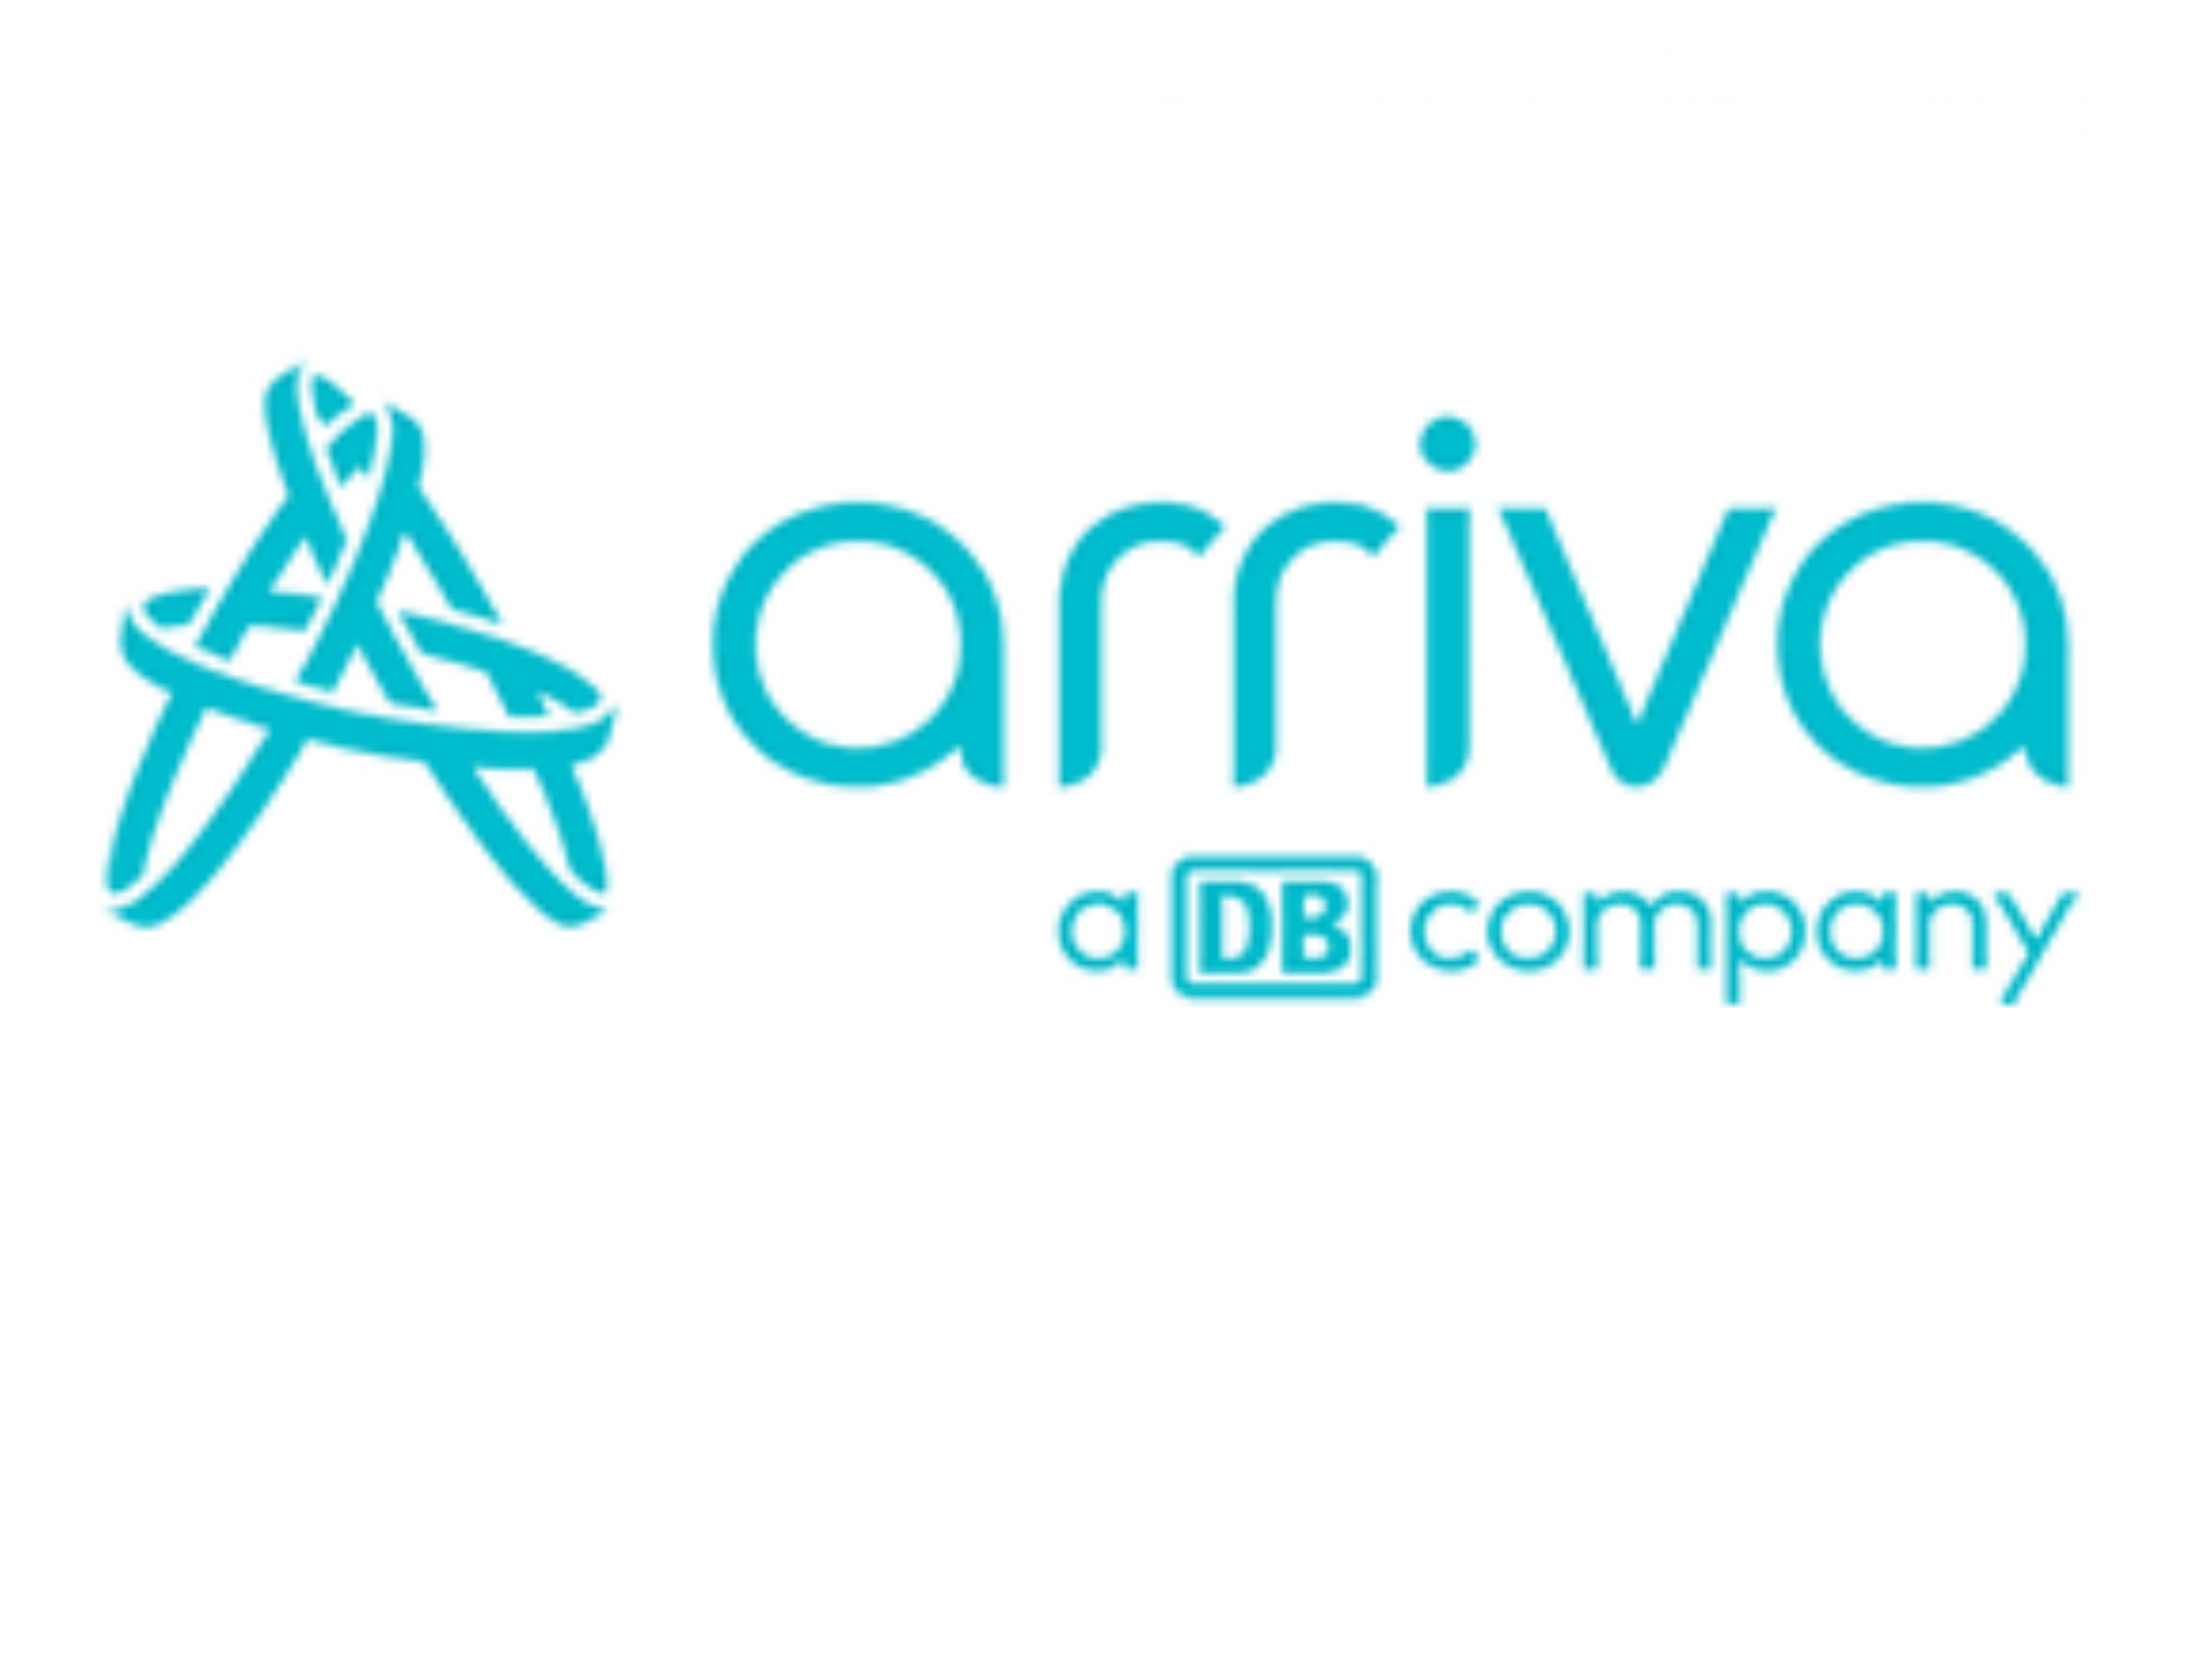 Guidance for Customers with Disabilities with Arriva Bus